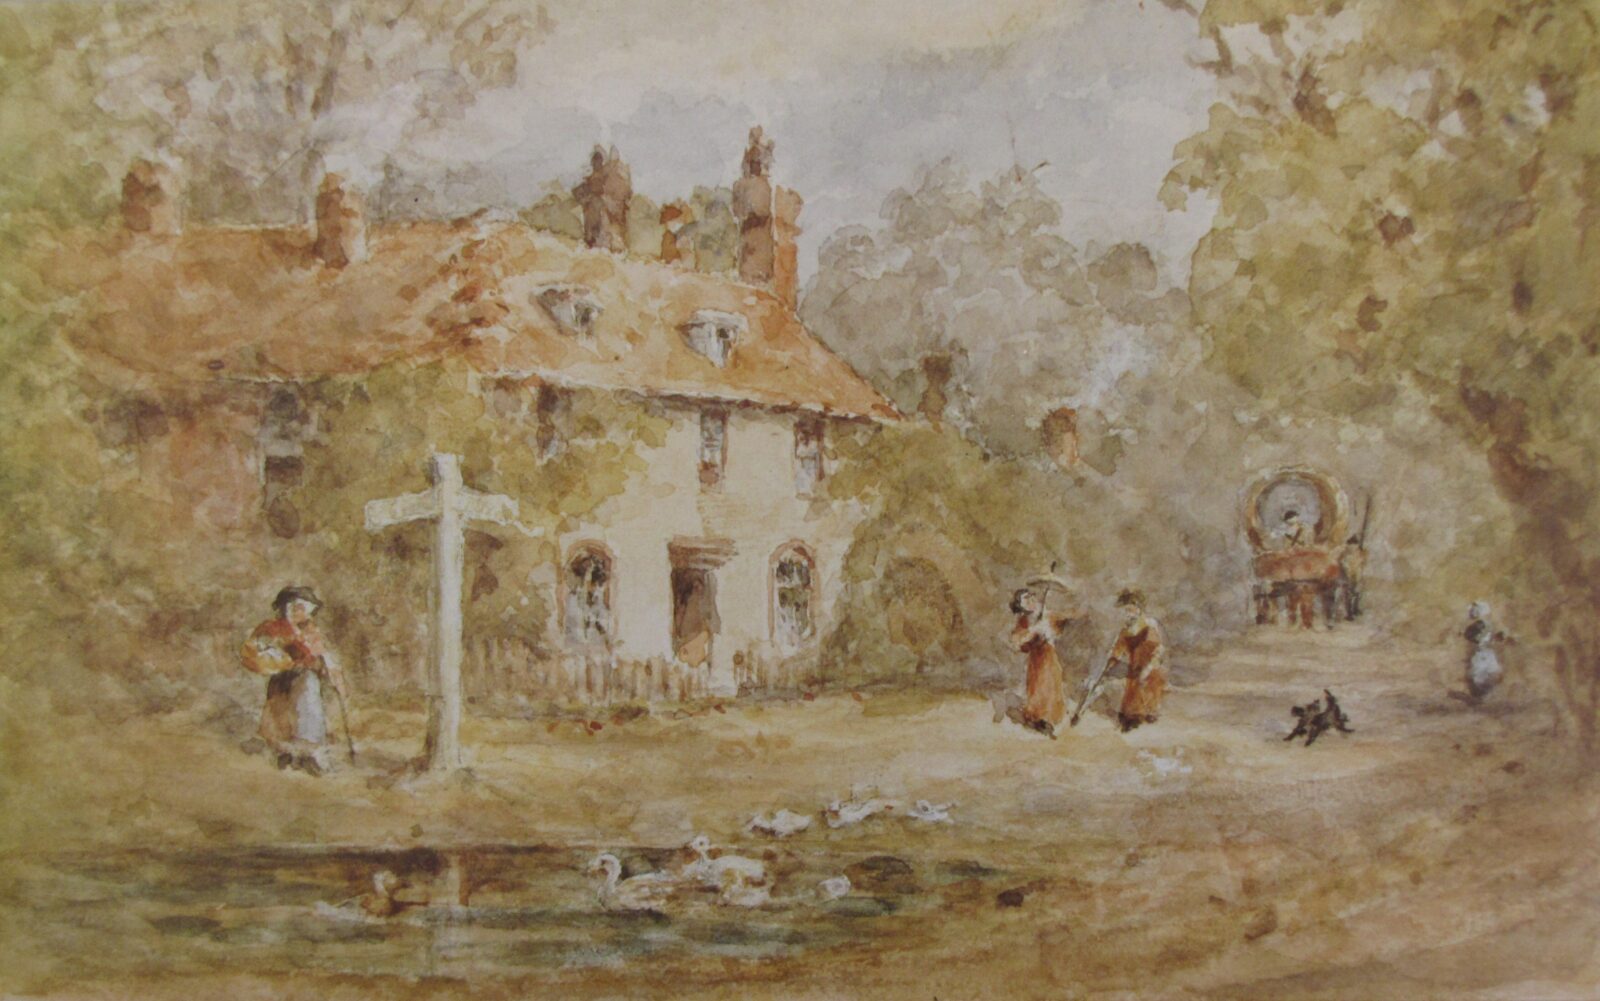 A watercolour painting of Chawton Cottage from the Museum collection